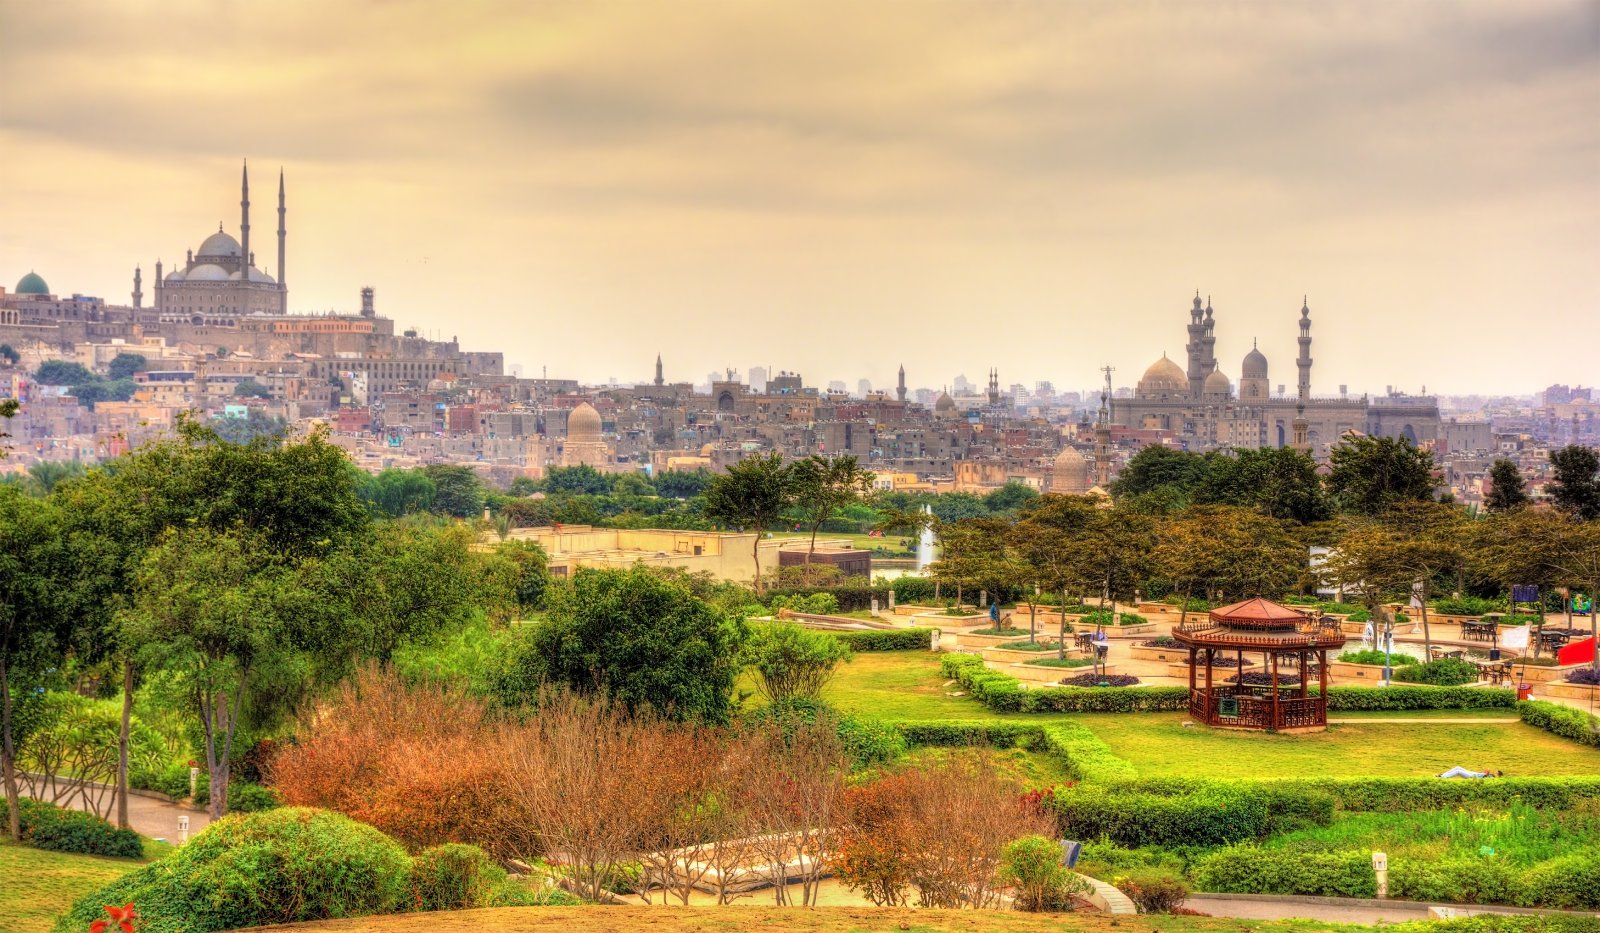 <p class="wp-caption-text">Image Credit: Shutterstock / Leonid Andronov</p>  <p><span>Al-Azhar Park is a testament to Cairo’s ability to blend history with modernity. Once a neglected area, it was transformed into a lush, expansive park, offering residents and visitors a much-needed green space. The park, with its carefully landscaped gardens, walkways, and water features, provides a serene escape from the urban hustle and bustle. It also offers stunning views of the Cairo skyline, including the Citadel and the Mosque of Muhammad Ali. Al-Azhar Park is a prime example of successful urban renewal, serving as a green lung for the city and a space for cultural events and family outings.</span> </p>